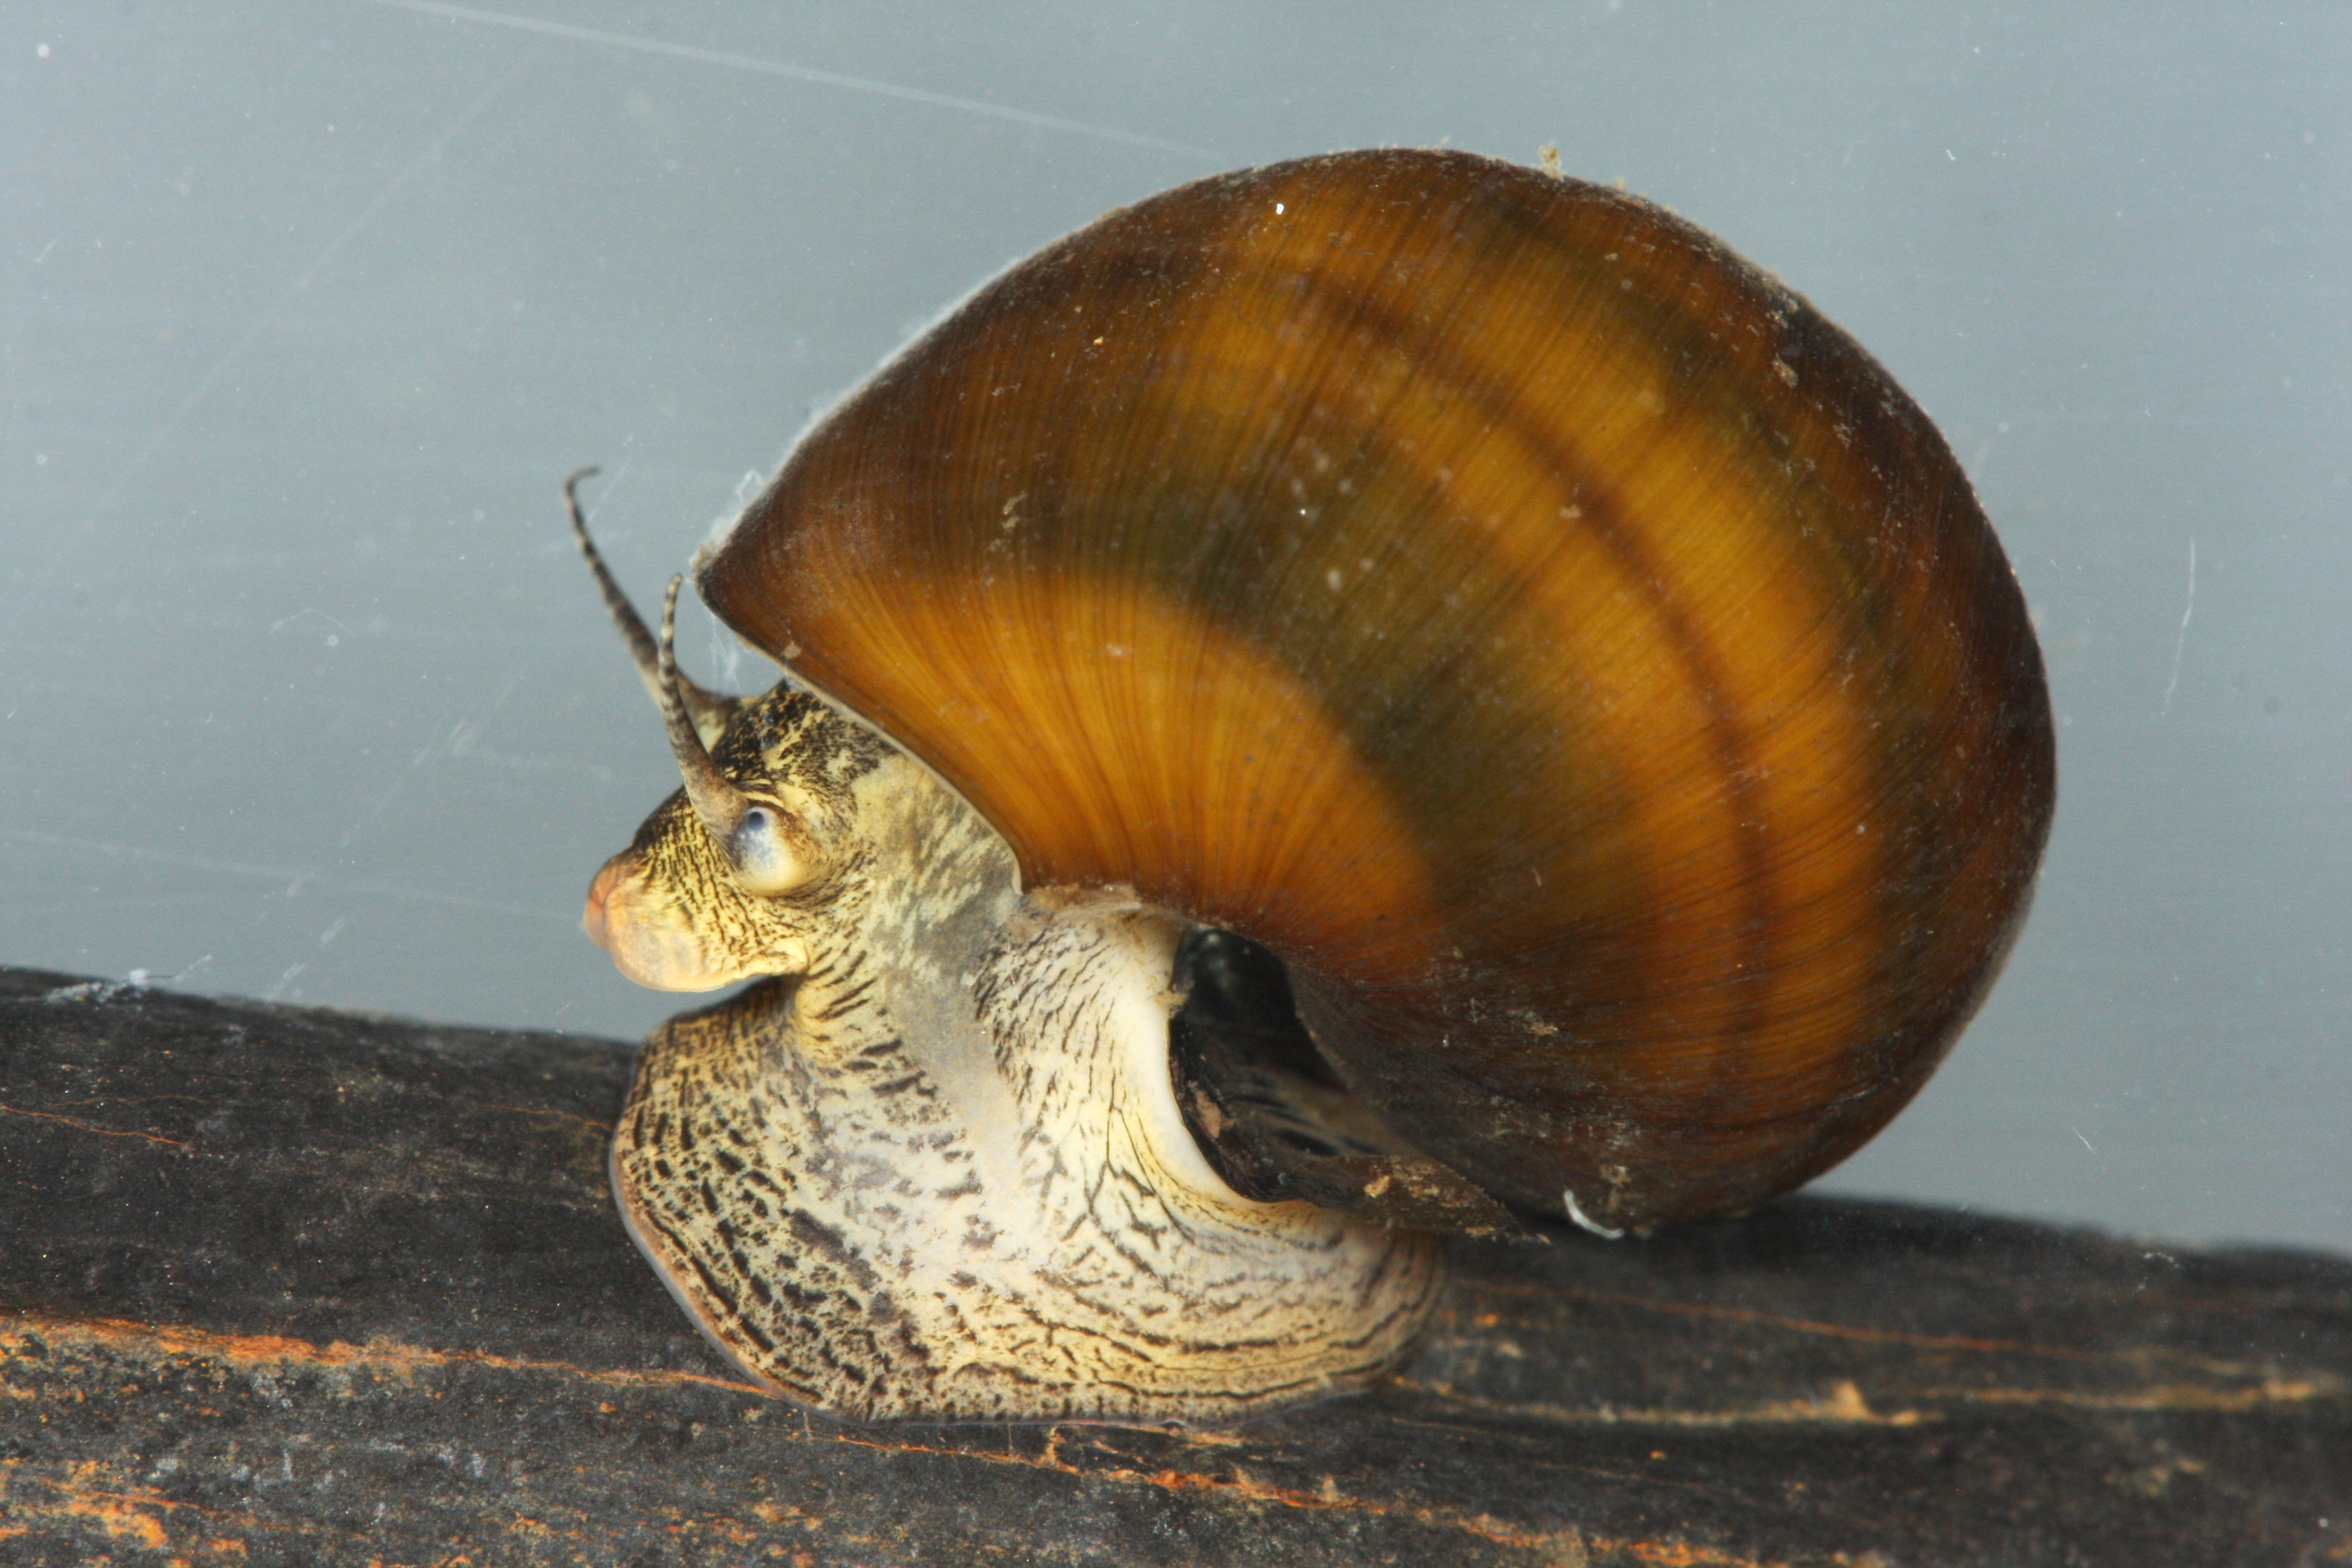 A closeup of a snail in an aquarium. Its head, antennae, body and shell are all visible.